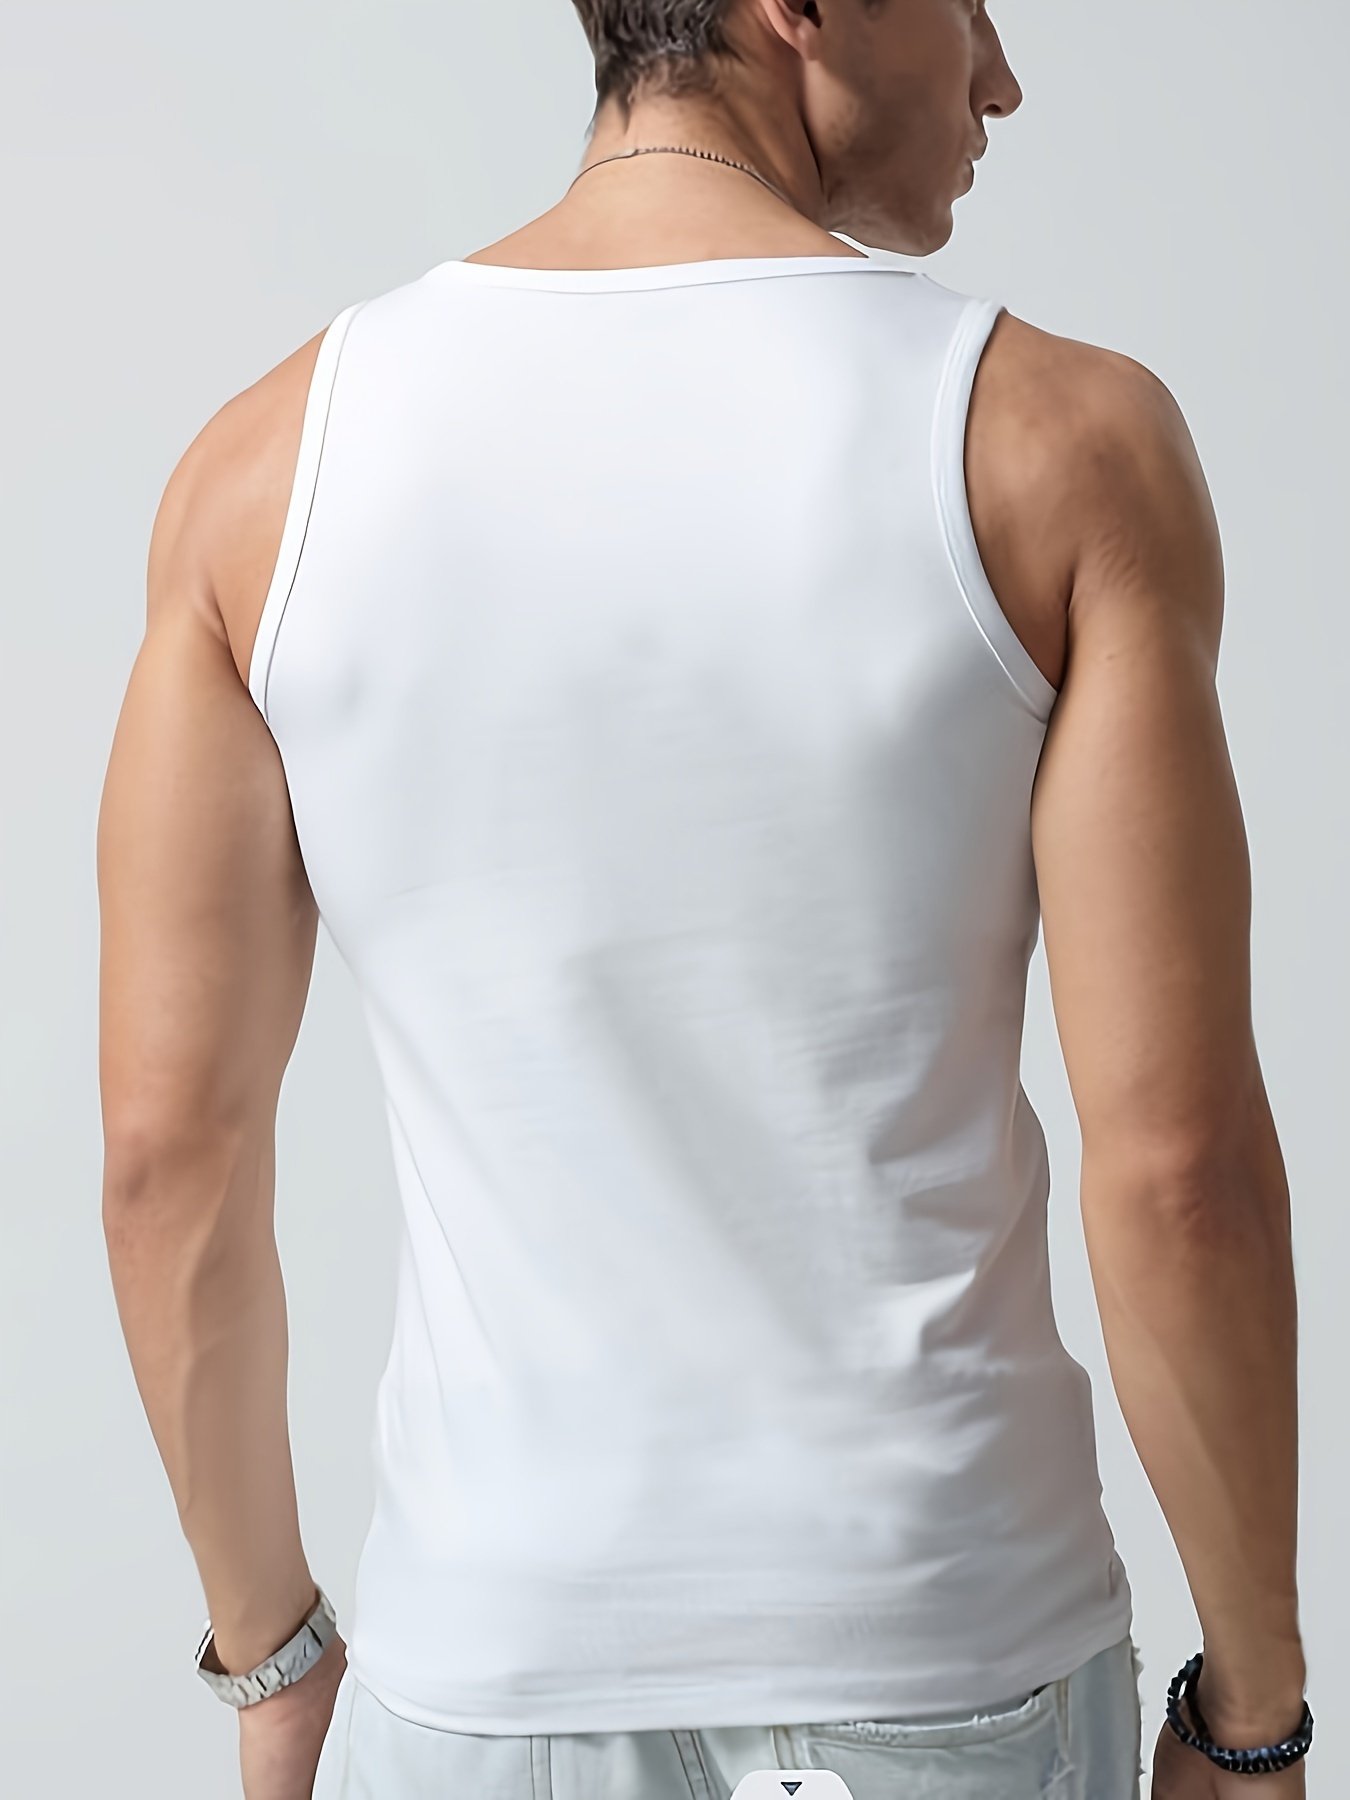 mens solid tank top active quick dry breathable crew neck sleeveless shirt mens clothing for summer outdoor details 6